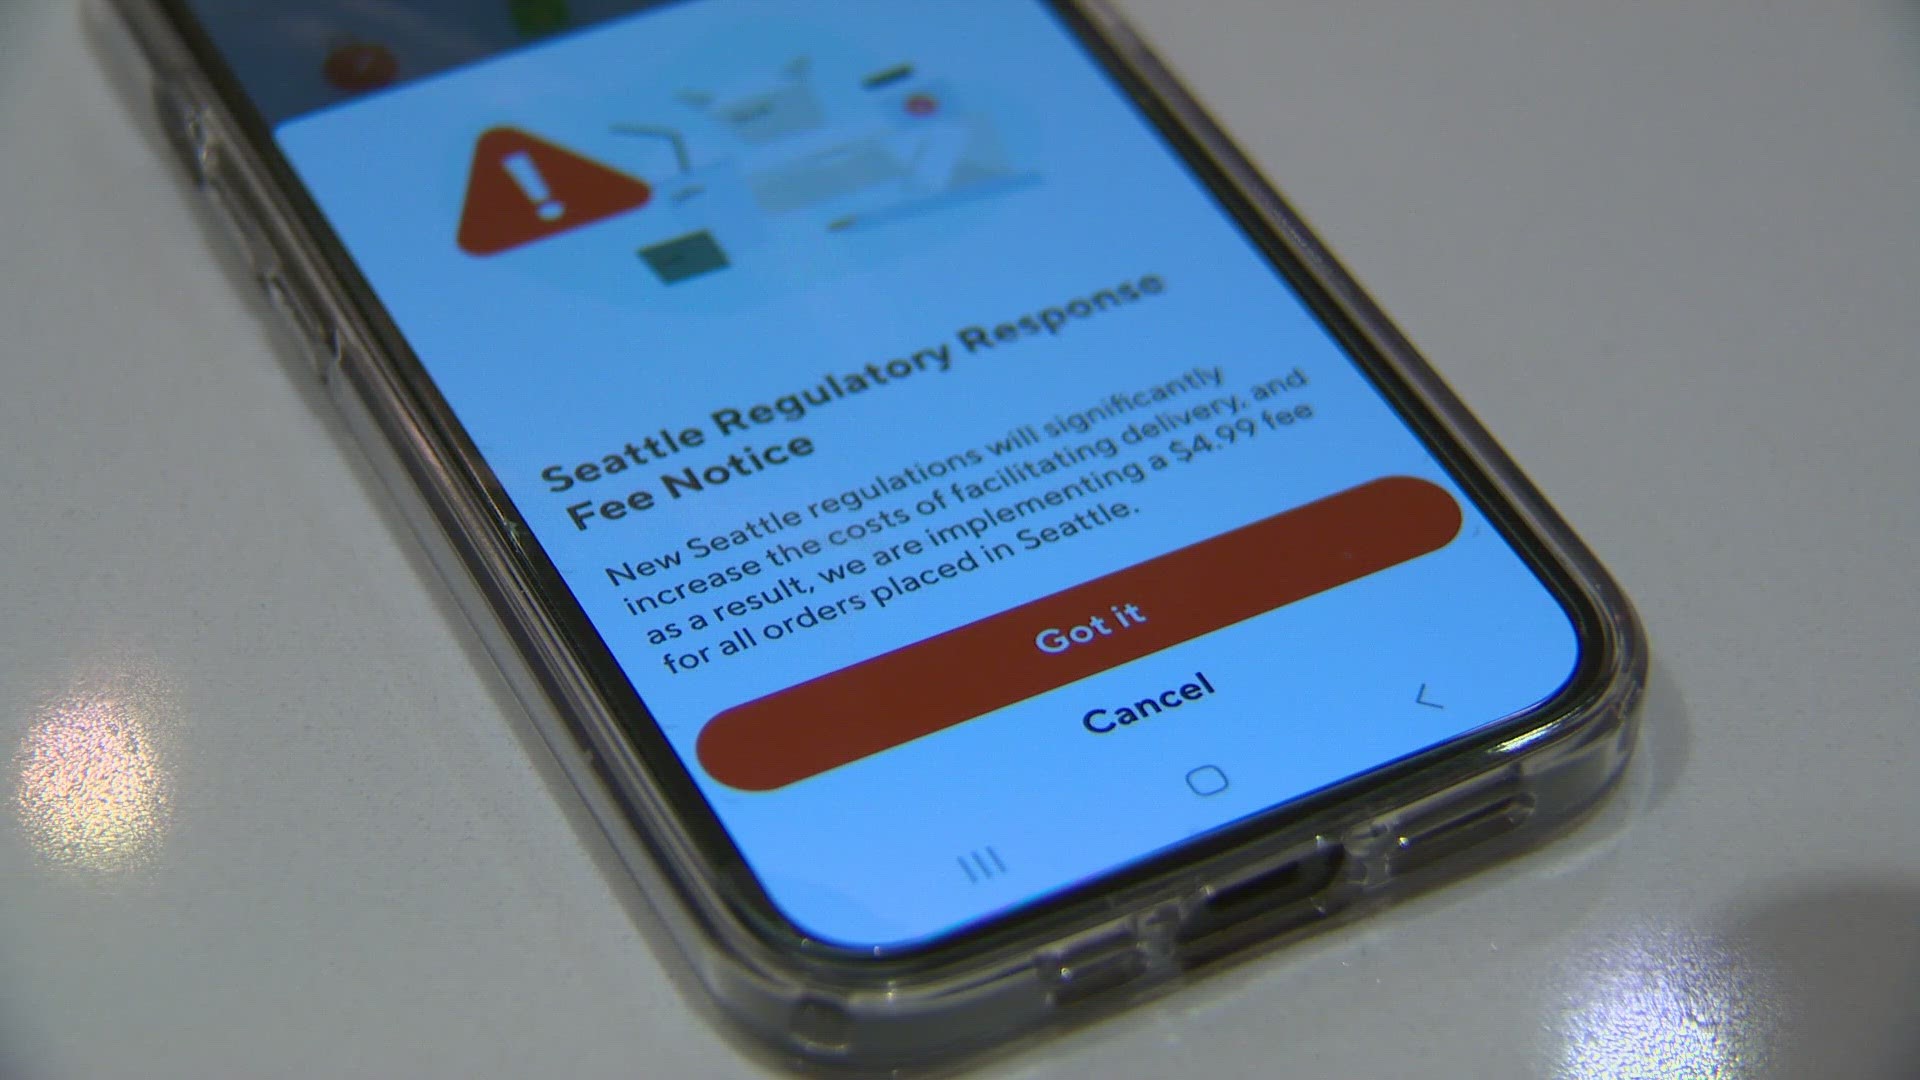 Multiple Seattle residents told KING 5 they have decided to boycott their food delivery apps.